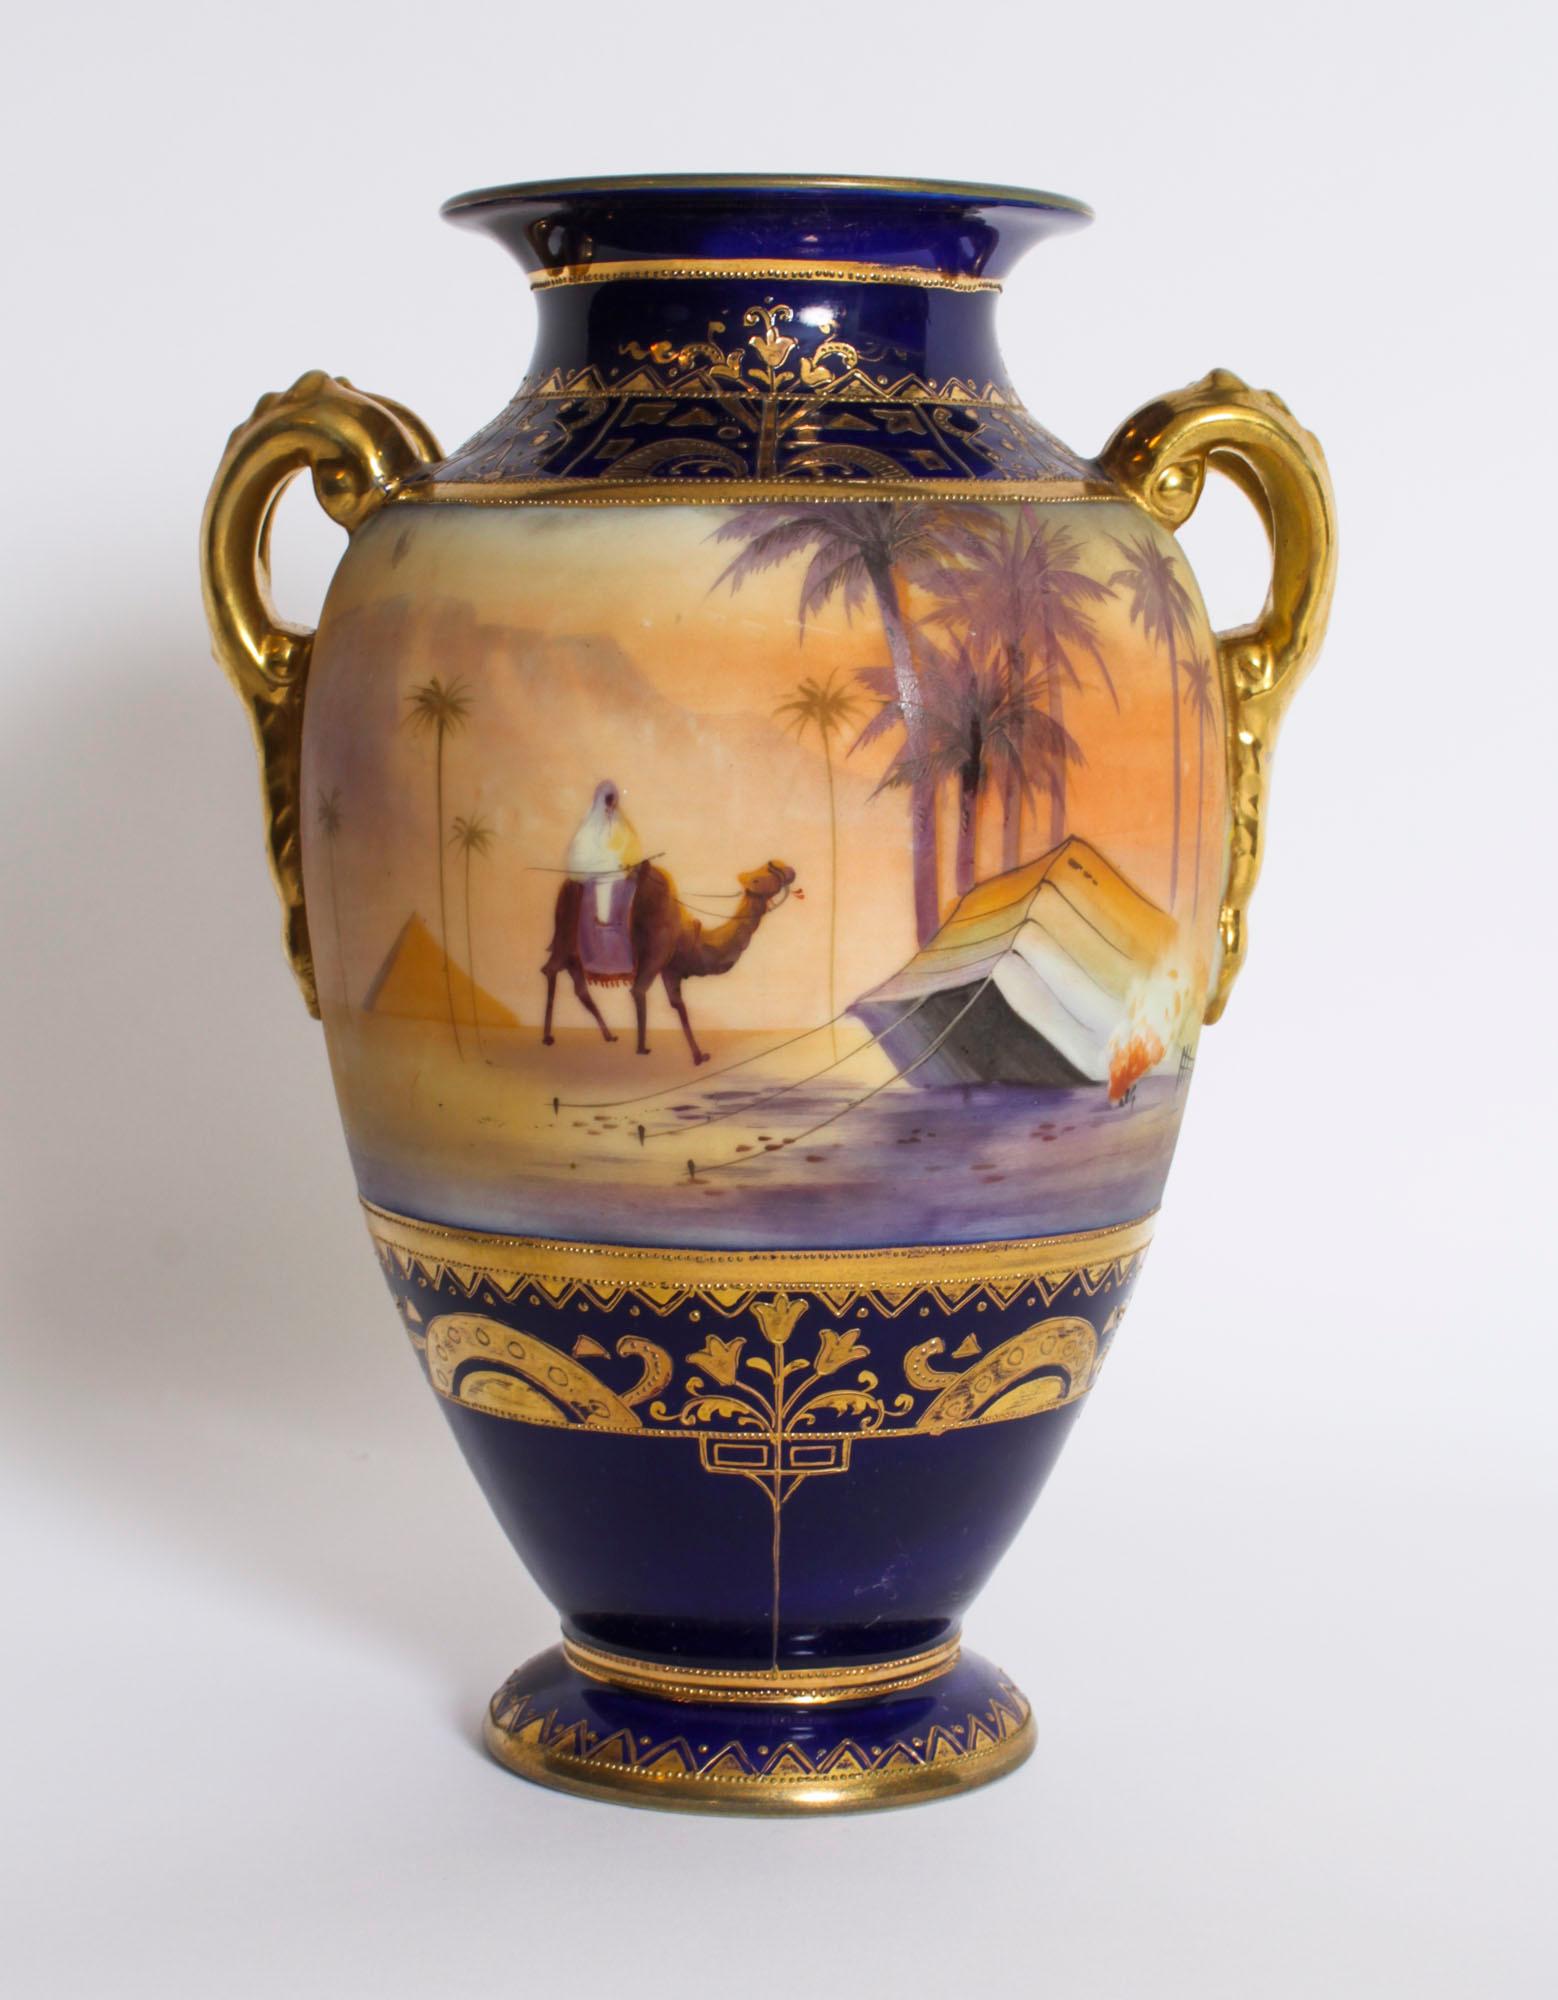 This is a beautiful antique pair of Taisho Period hand-painted twin handled Noritake porcelain vases, c.1920 in date.
 
They have an attractive and dominant navy-blue background with gilt high lights and feature painted scenes of figures and camels